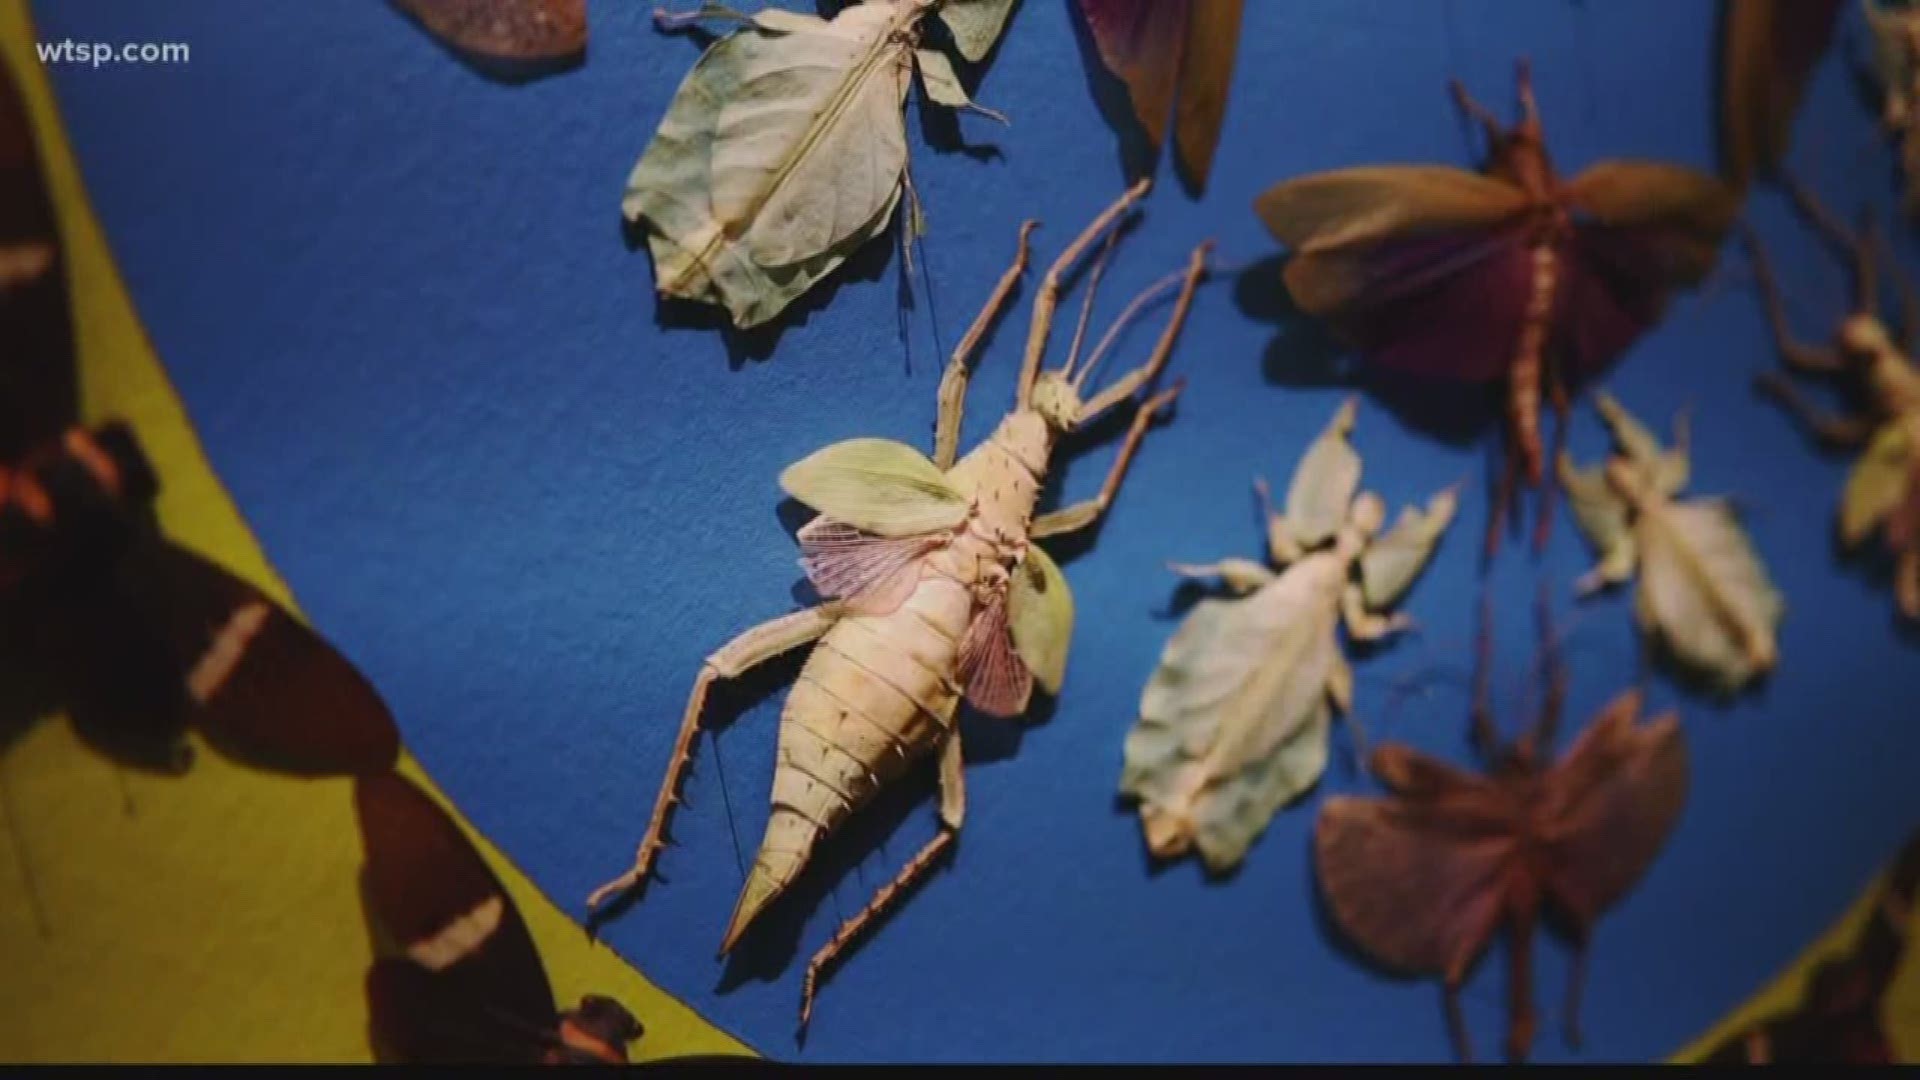 Artist Jennifer Angus has a new installation of nearly 5,000 insects at the Museum of Fine Arts St. Petersburg.